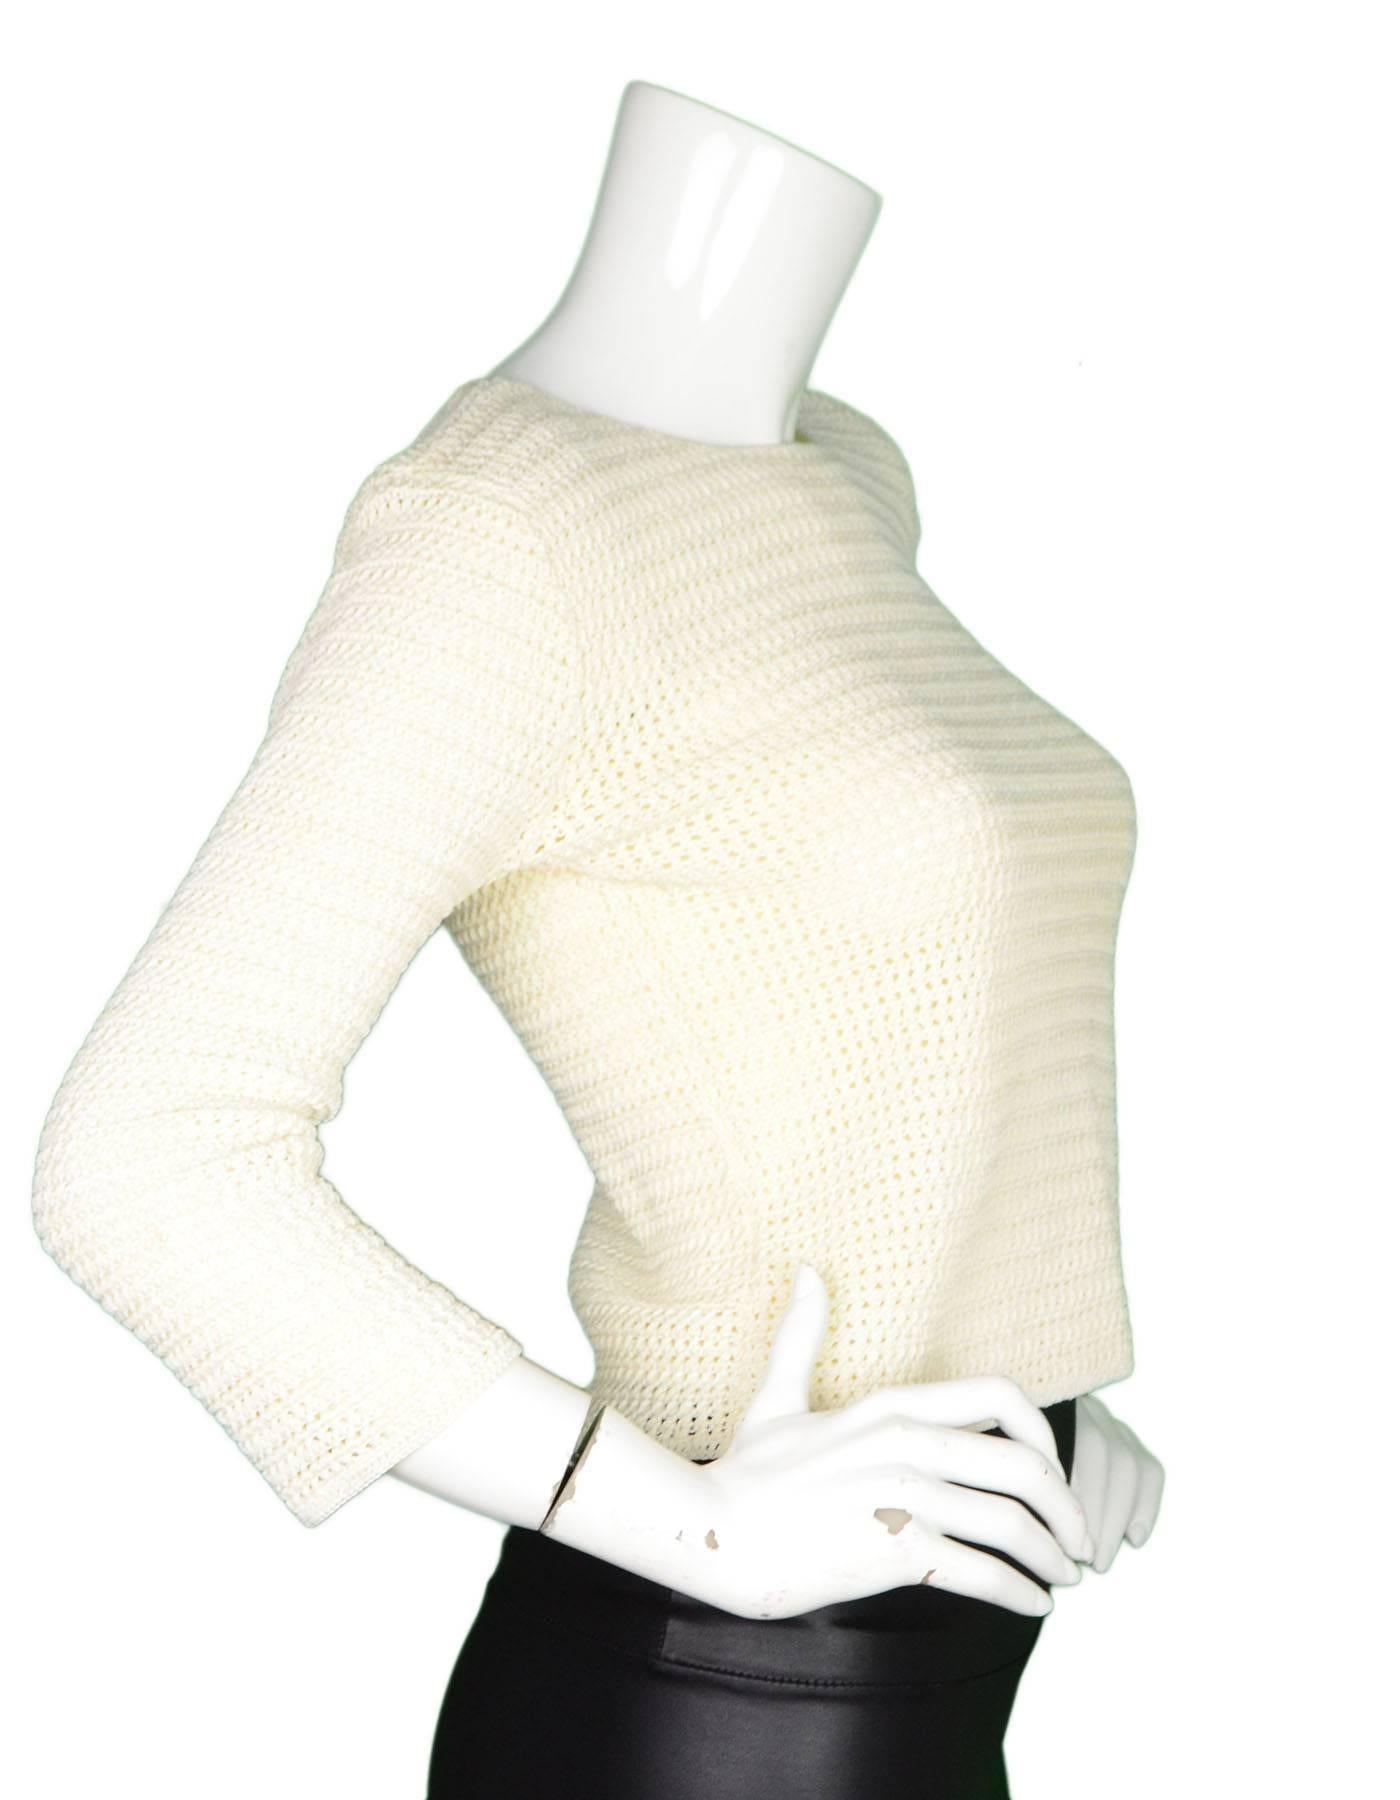 Chanel Cream Crochet Top Sz 38

Made In: France
Year Of Production: 2001
Color: Cream
Composition: 57% Rayon, 43% Cotton
Lining: None
Closure/Opening: Pull over
Overall Condition: Excellent pre-owned condition with the exception of very